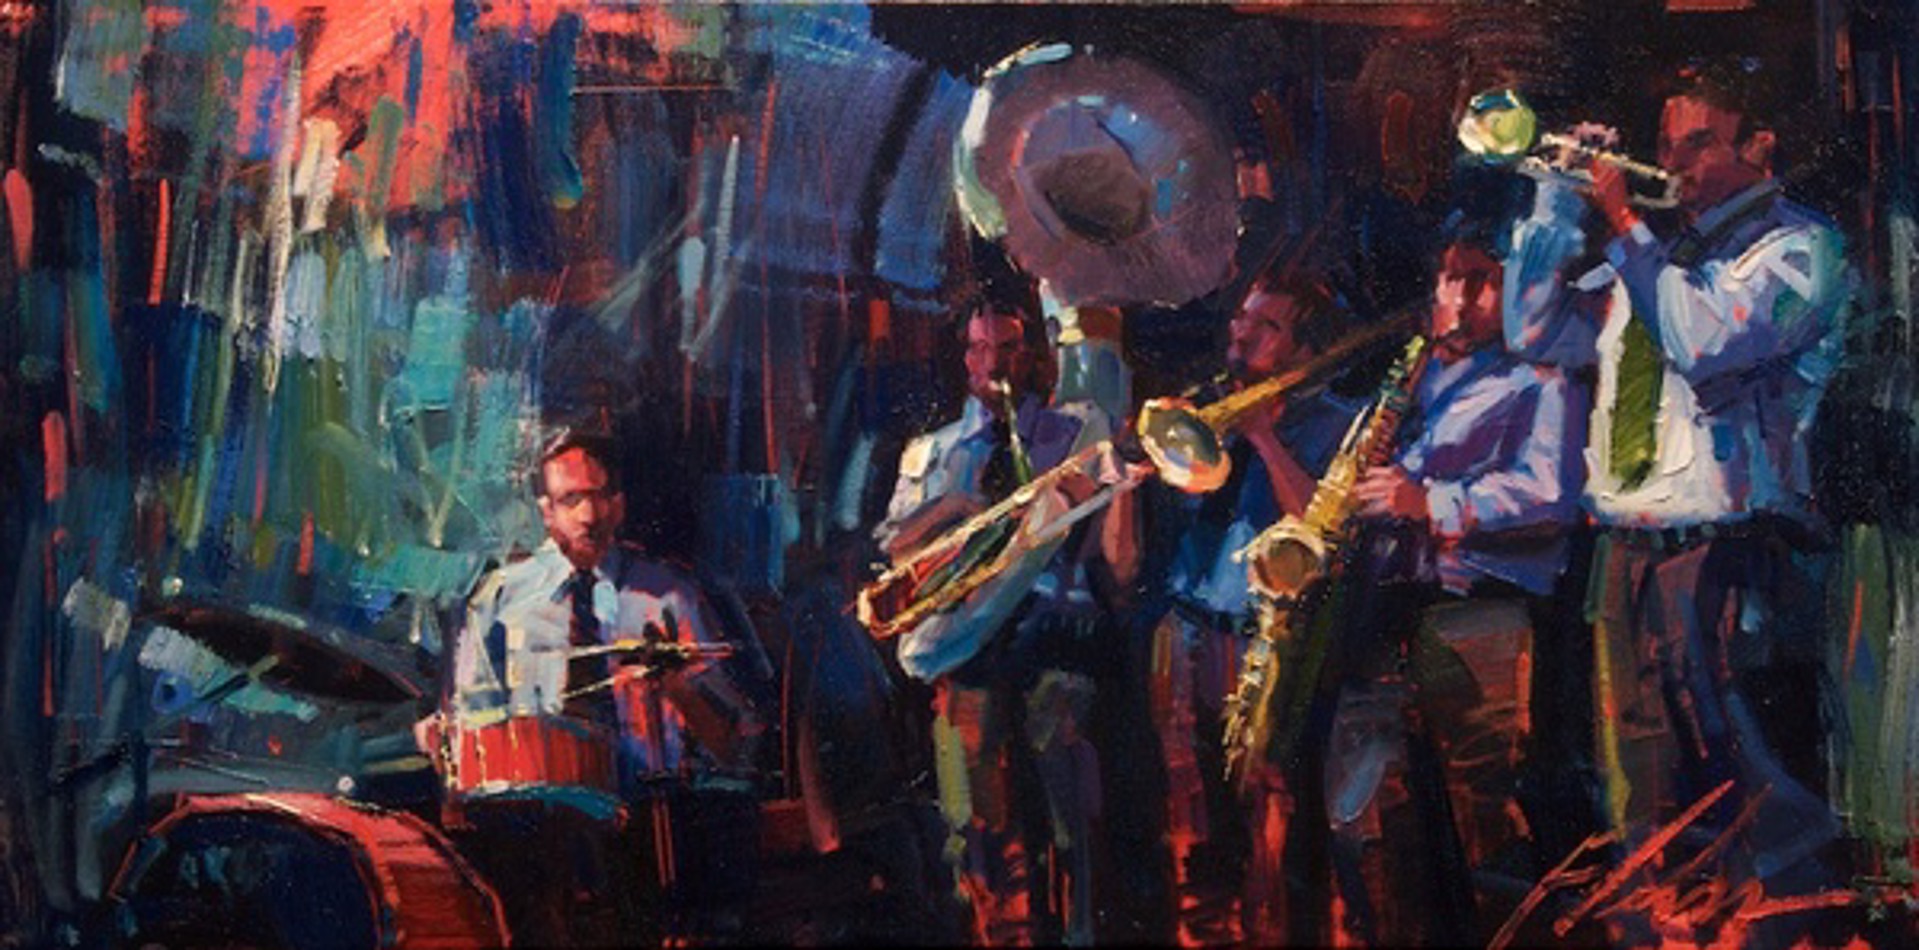 Blue Note by Michael Flohr